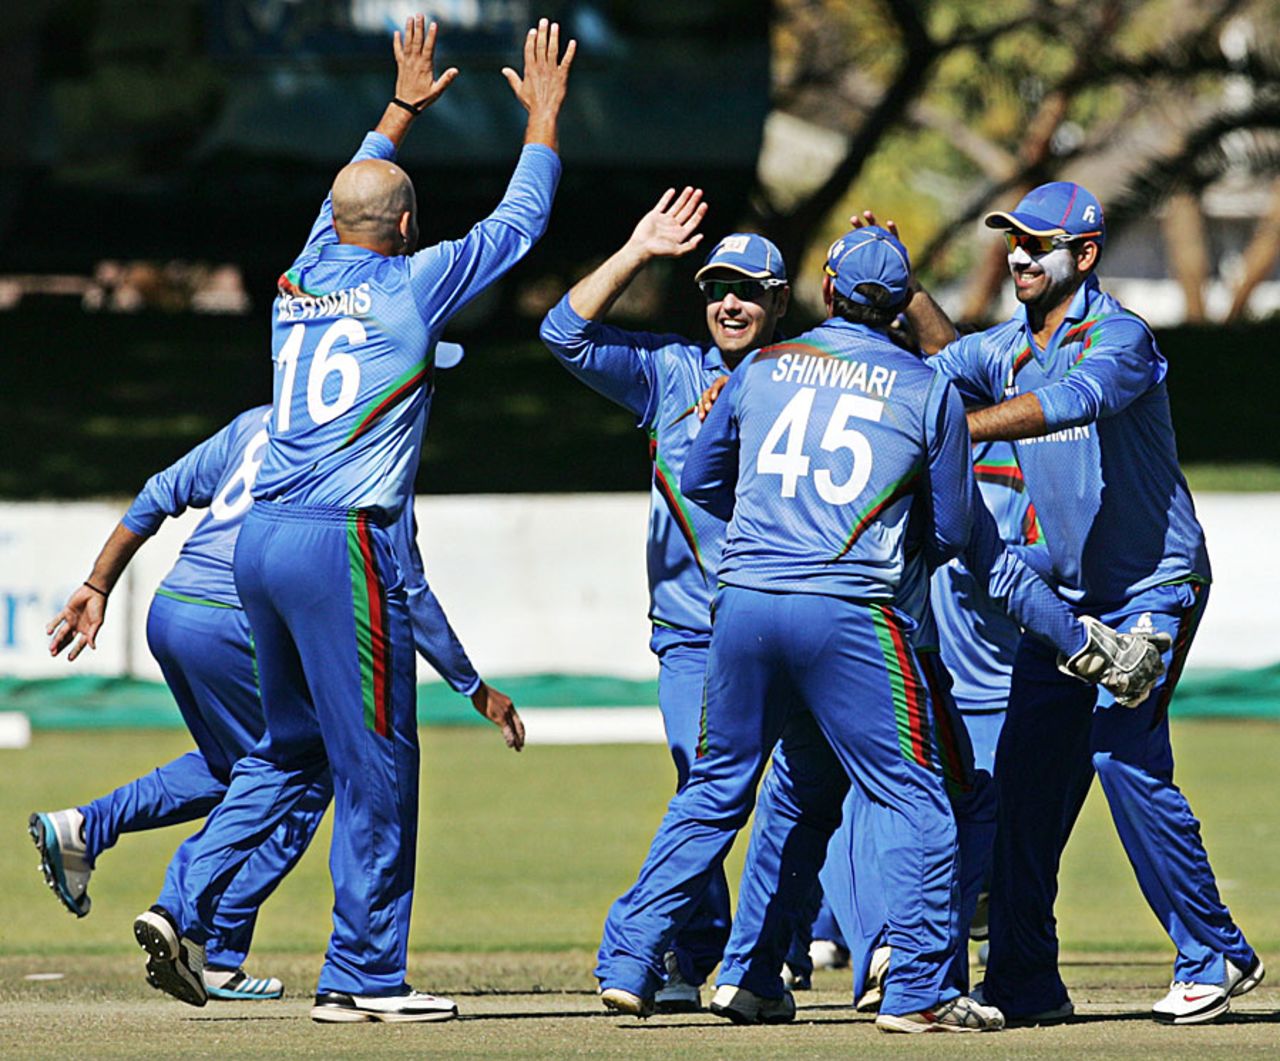 Afghanistan players are ecstatic after picking up a wicket, Zimbabwe v Afghanistan, 4th ODI, Bulawayo, July 24, 2014